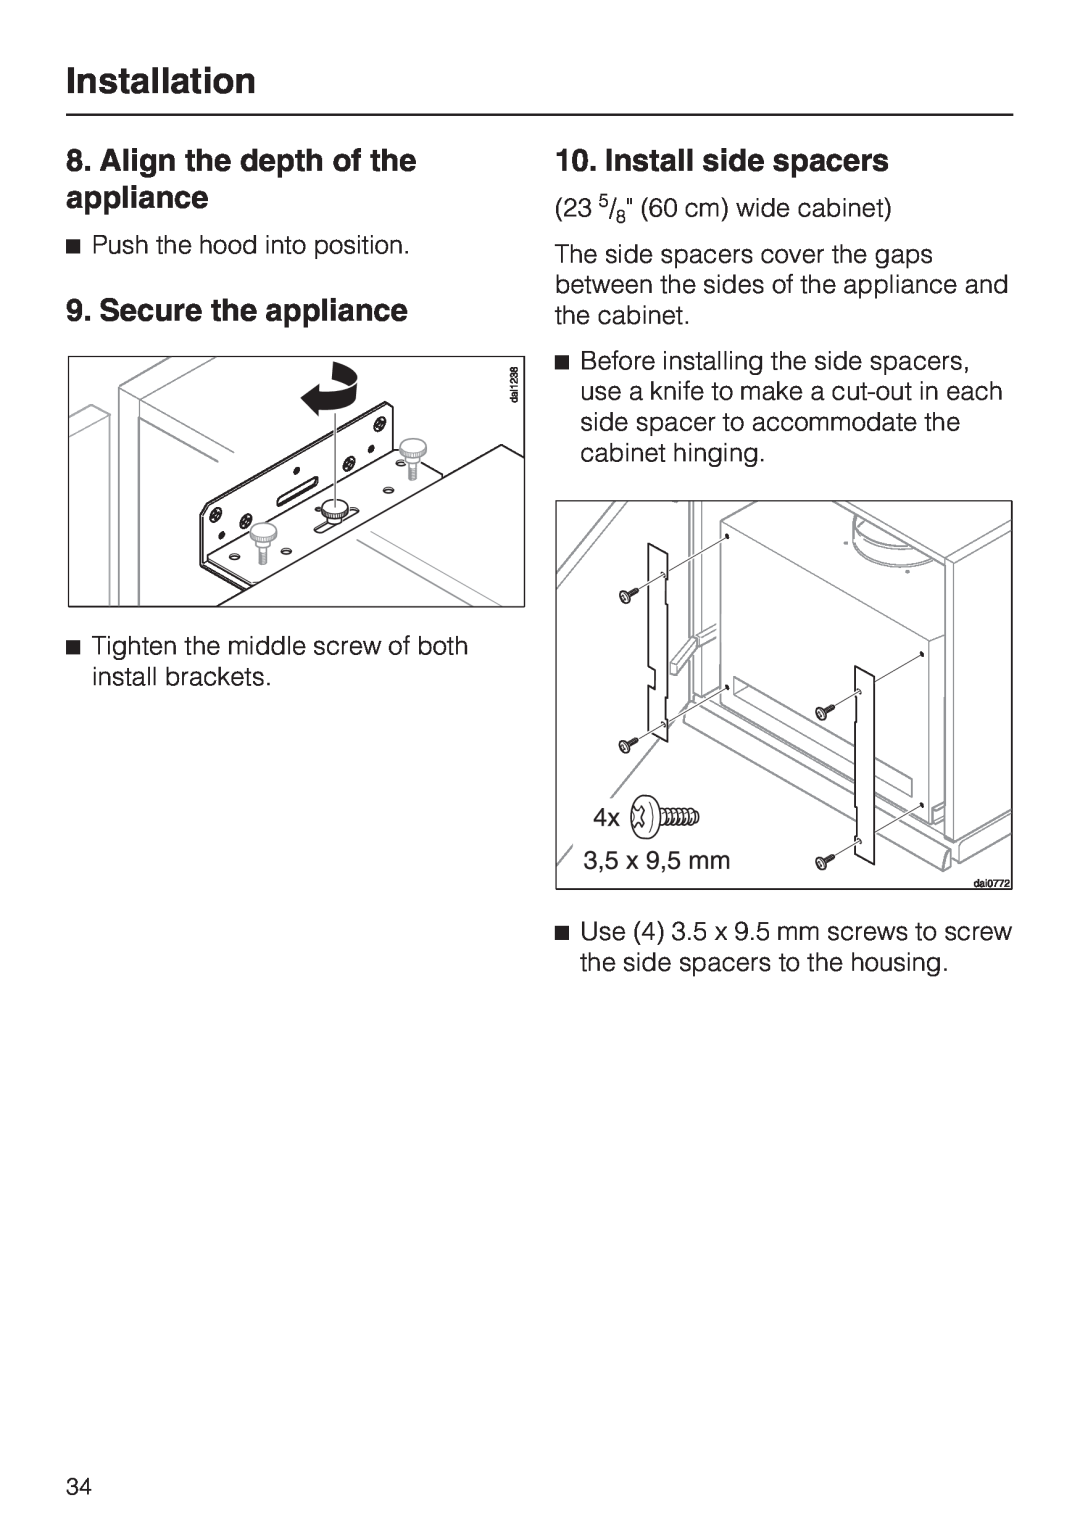 Miele DA326-1I, DA329-1I Installation, Align the depth of the appliance, Secure the appliance, Install side spacers 